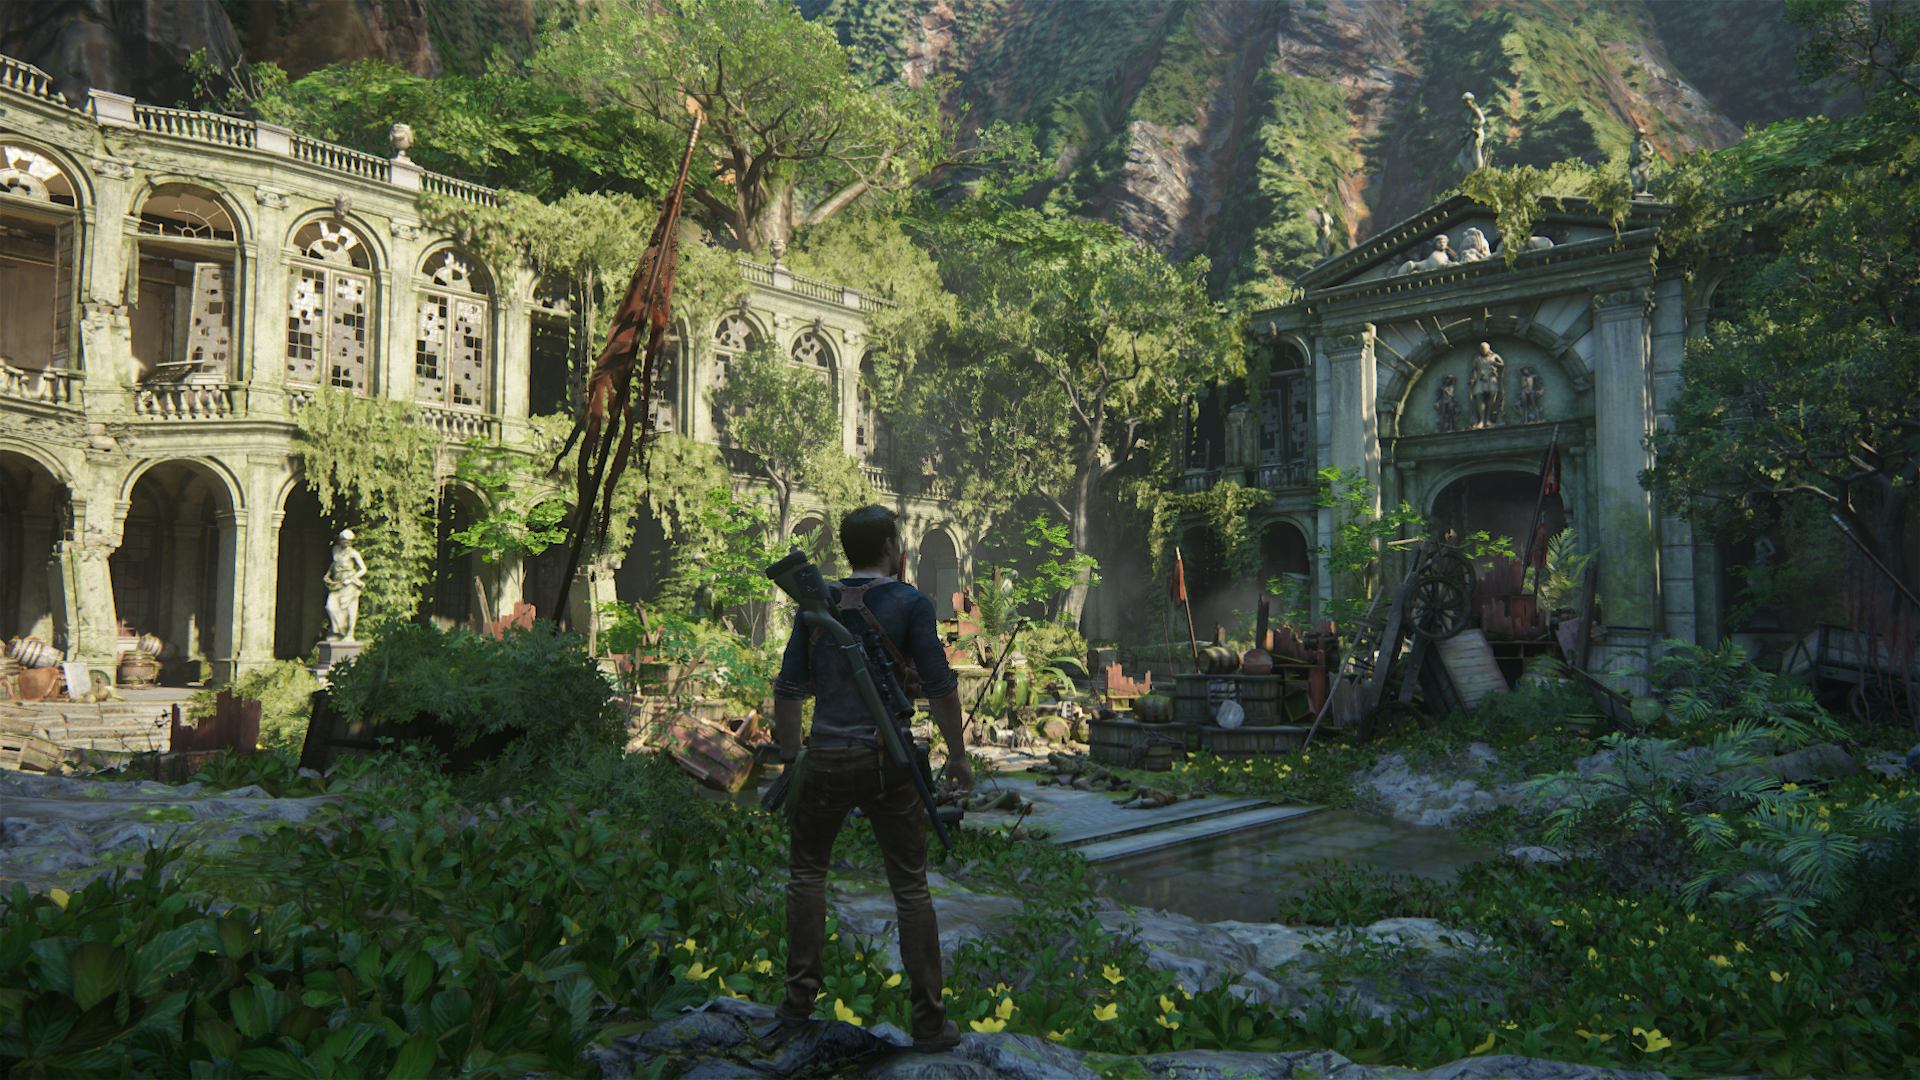 Uncharted 4 A Thiefs End Uncharted PlayStation 4 Naughty Dog Uncharted 4 1920x1080